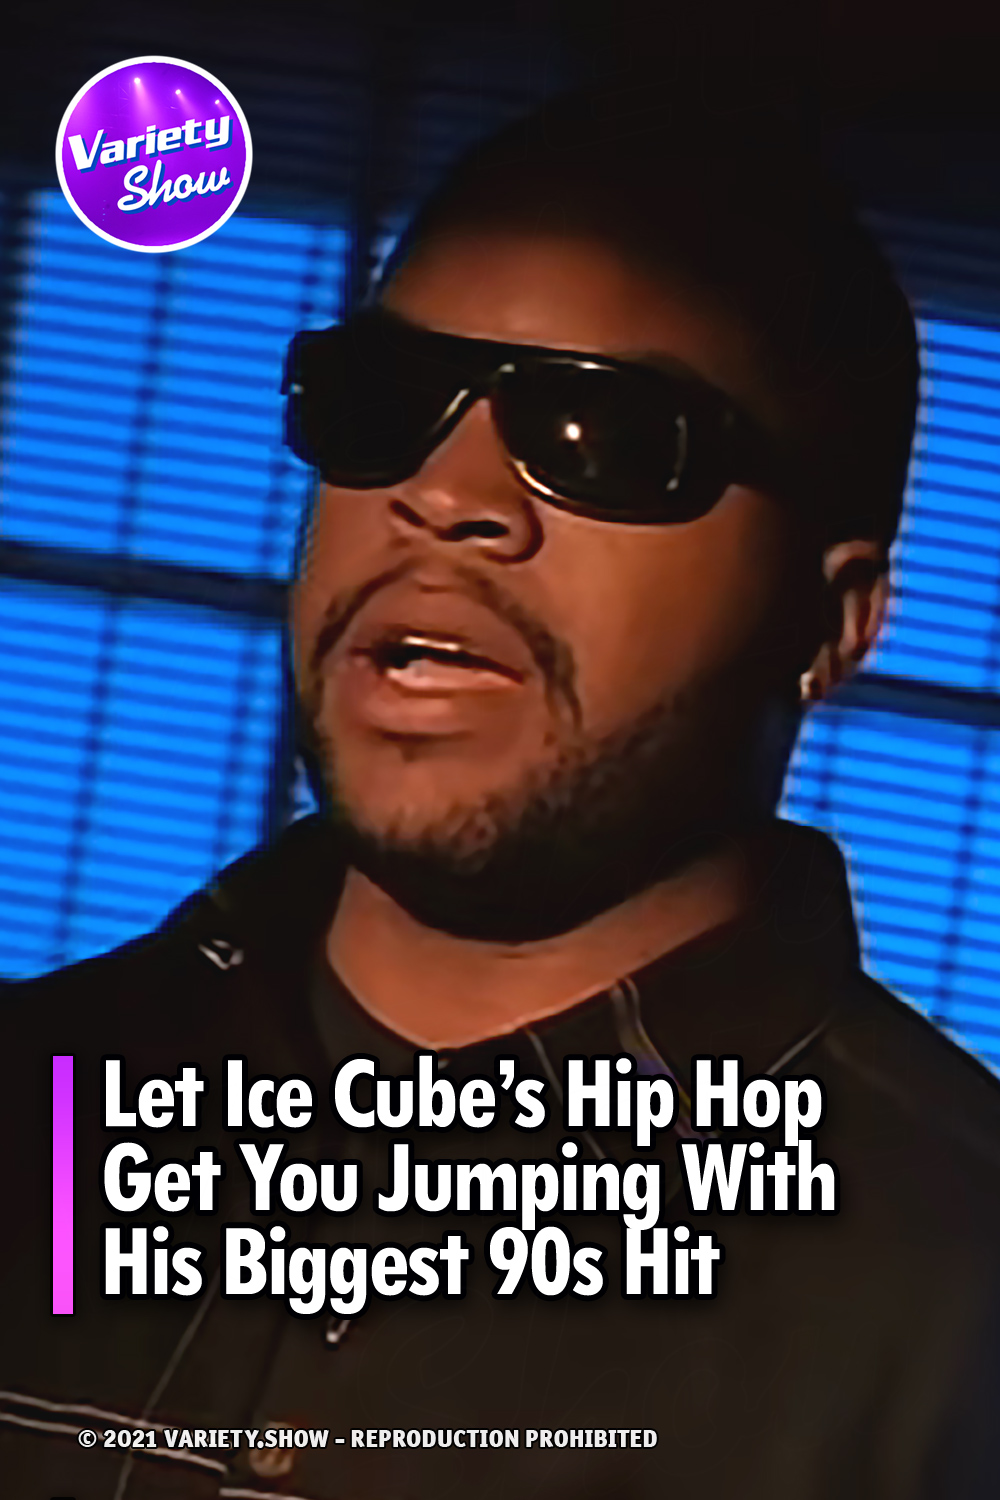 Let Ice Cube’s Hip Hop Get You Jumping With His Biggest 90s Hit